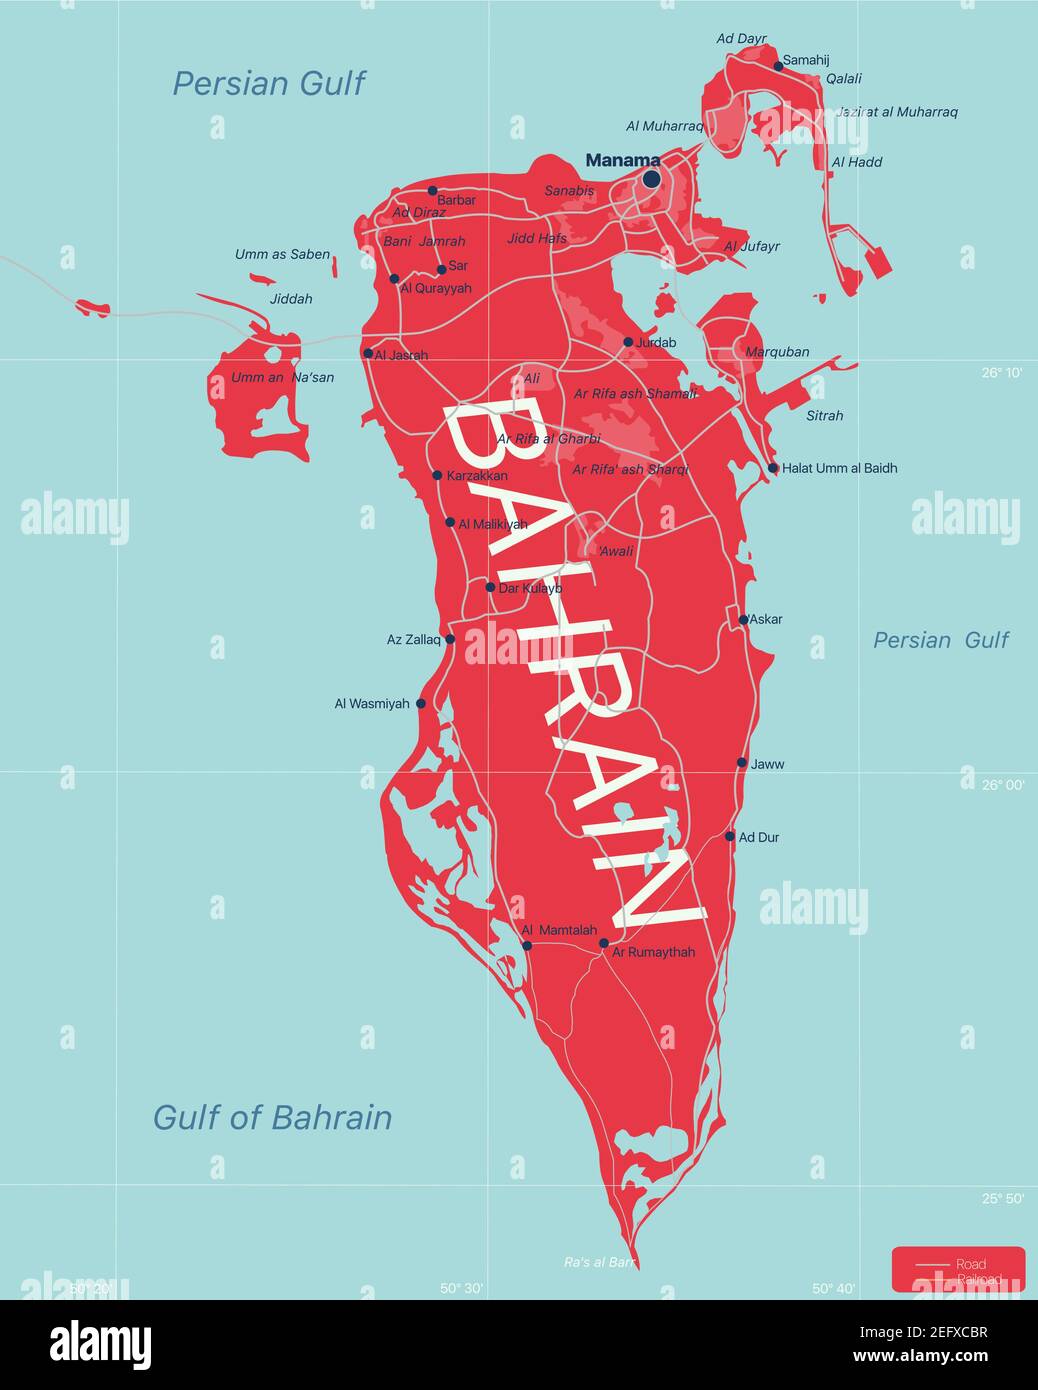 Bahrain Country Detailed Editable Map With Regions Cities And Towns Roads And Railways Geographic Sites Vector Eps 10 File 2EFXCBR 